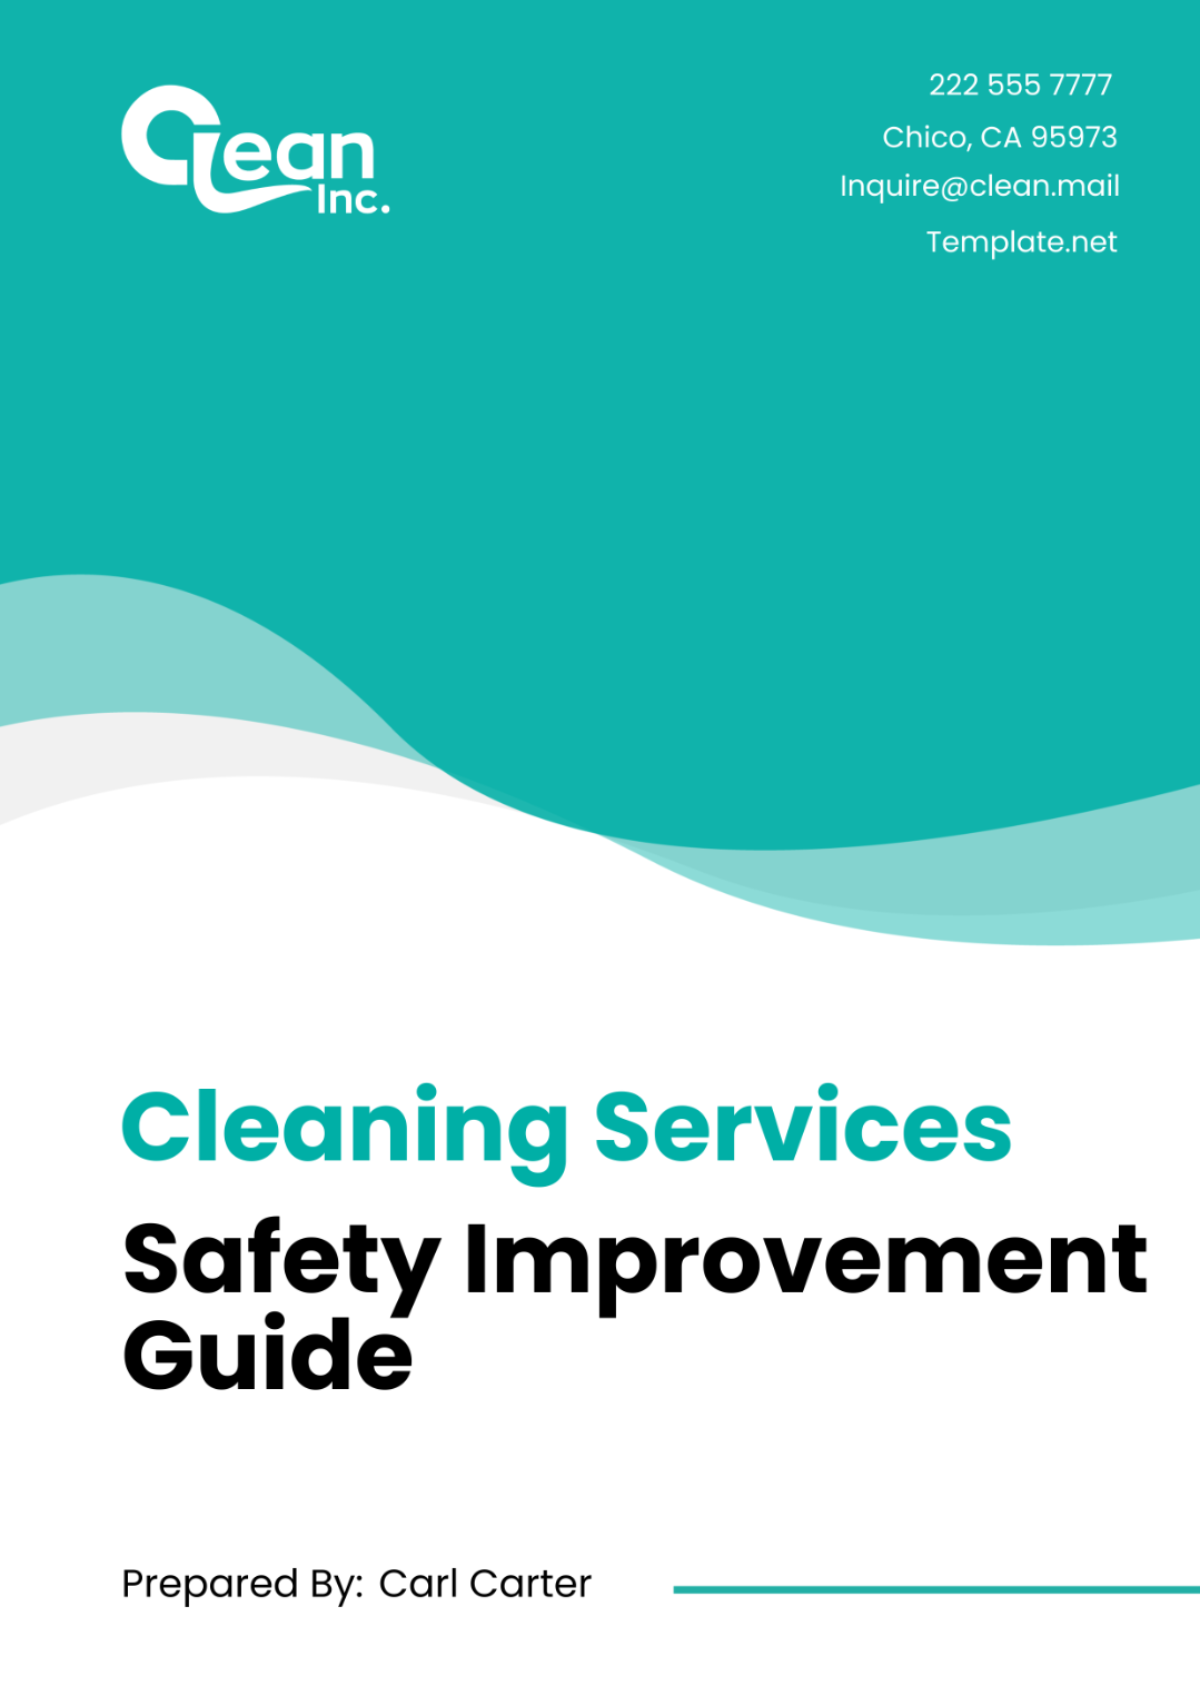 Cleaning Services Safety Improvement Guide Template